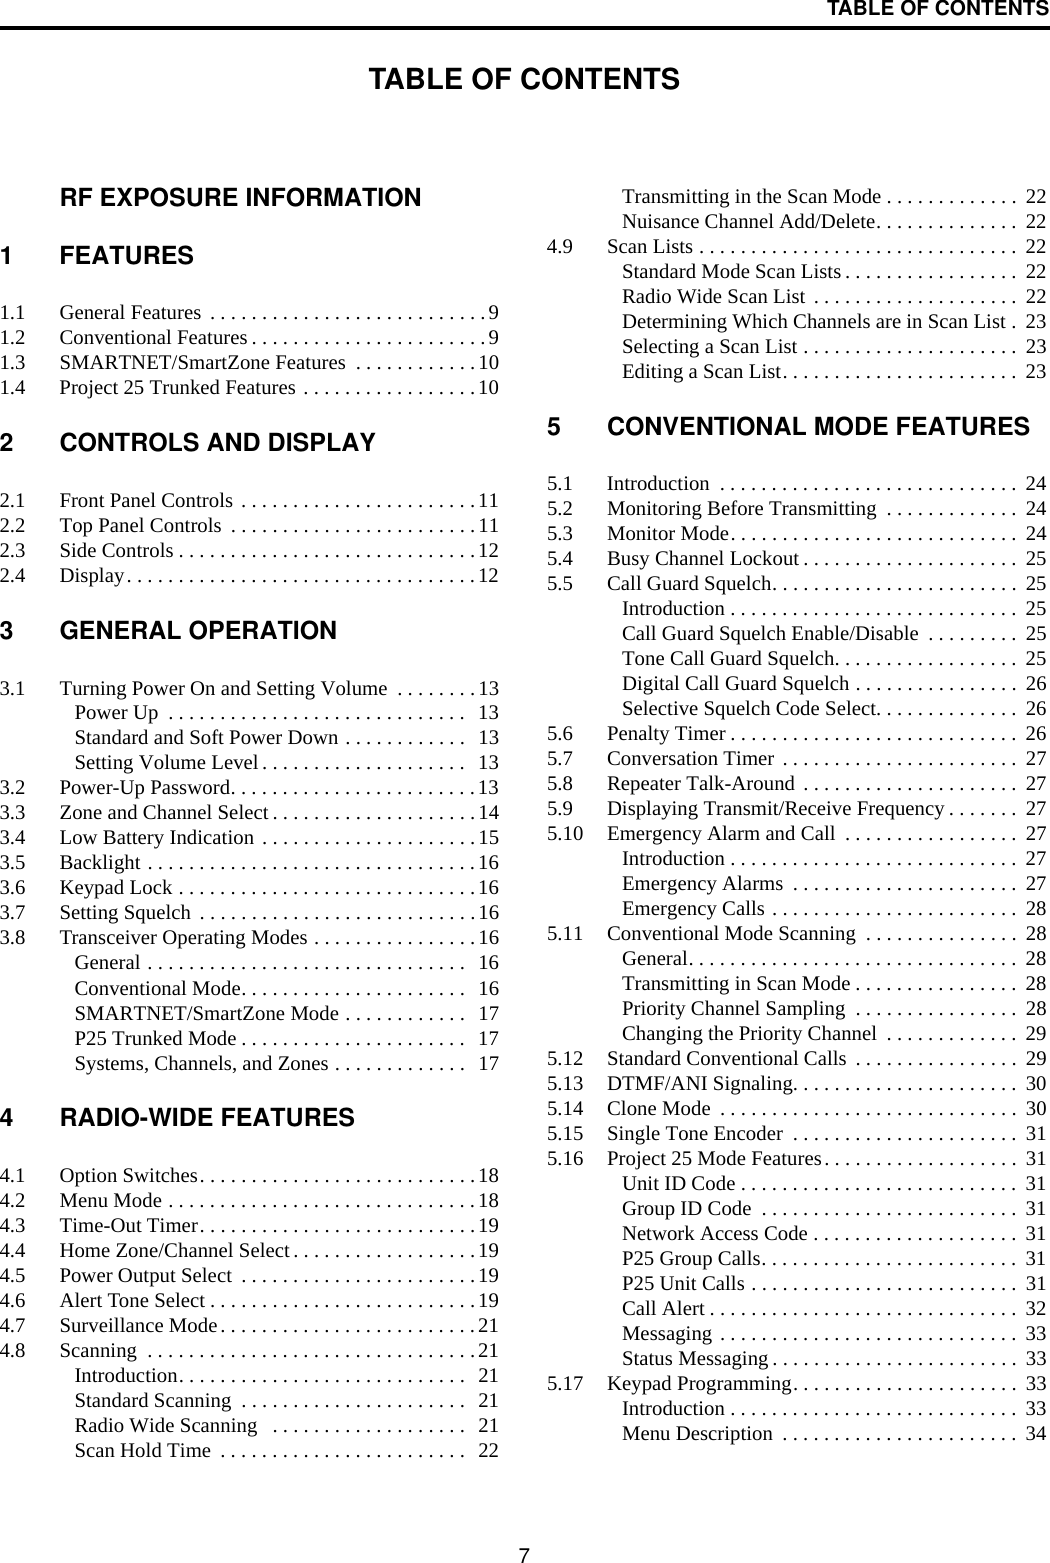 7TABLE OF CONTENTSTABLE OF CONTENTSRF EXPOSURE INFORMATION1 FEATURES1.1 General Features  . . . . . . . . . . . . . . . . . . . . . . . . . . .91.2 Conventional Features . . . . . . . . . . . . . . . . . . . . . . .91.3 SMARTNET/SmartZone Features  . . . . . . . . . . . .101.4 Project 25 Trunked Features . . . . . . . . . . . . . . . . .102 CONTROLS AND DISPLAY2.1 Front Panel Controls . . . . . . . . . . . . . . . . . . . . . . .112.2 Top Panel Controls  . . . . . . . . . . . . . . . . . . . . . . . .112.3 Side Controls . . . . . . . . . . . . . . . . . . . . . . . . . . . . .122.4 Display. . . . . . . . . . . . . . . . . . . . . . . . . . . . . . . . . .123 GENERAL OPERATION3.1 Turning Power On and Setting Volume  . . . . . . . .13Power Up  . . . . . . . . . . . . . . . . . . . . . . . . . . . . .  13Standard and Soft Power Down . . . . . . . . . . . .  13Setting Volume Level . . . . . . . . . . . . . . . . . . . .   133.2 Power-Up Password. . . . . . . . . . . . . . . . . . . . . . . .133.3 Zone and Channel Select . . . . . . . . . . . . . . . . . . . .143.4 Low Battery Indication . . . . . . . . . . . . . . . . . . . . .153.5 Backlight . . . . . . . . . . . . . . . . . . . . . . . . . . . . . . . .163.6 Keypad Lock . . . . . . . . . . . . . . . . . . . . . . . . . . . . .163.7 Setting Squelch  . . . . . . . . . . . . . . . . . . . . . . . . . . .163.8 Transceiver Operating Modes . . . . . . . . . . . . . . . .16General . . . . . . . . . . . . . . . . . . . . . . . . . . . . . . .  16Conventional Mode. . . . . . . . . . . . . . . . . . . . . .  16SMARTNET/SmartZone Mode . . . . . . . . . . . .   17P25 Trunked Mode . . . . . . . . . . . . . . . . . . . . . .   17Systems, Channels, and Zones . . . . . . . . . . . . .  174 RADIO-WIDE FEATURES4.1 Option Switches. . . . . . . . . . . . . . . . . . . . . . . . . . .184.2 Menu Mode . . . . . . . . . . . . . . . . . . . . . . . . . . . . . .184.3 Time-Out Timer. . . . . . . . . . . . . . . . . . . . . . . . . . .194.4 Home Zone/Channel Select . . . . . . . . . . . . . . . . . .194.5 Power Output Select  . . . . . . . . . . . . . . . . . . . . . . .194.6 Alert Tone Select . . . . . . . . . . . . . . . . . . . . . . . . . .194.7 Surveillance Mode. . . . . . . . . . . . . . . . . . . . . . . . .214.8 Scanning  . . . . . . . . . . . . . . . . . . . . . . . . . . . . . . . .21Introduction. . . . . . . . . . . . . . . . . . . . . . . . . . . .  21Standard Scanning  . . . . . . . . . . . . . . . . . . . . . .  21Radio Wide Scanning   . . . . . . . . . . . . . . . . . . .  21Scan Hold Time  . . . . . . . . . . . . . . . . . . . . . . . .  22Transmitting in the Scan Mode . . . . . . . . . . . . .  22Nuisance Channel Add/Delete. . . . . . . . . . . . . .  224.9 Scan Lists . . . . . . . . . . . . . . . . . . . . . . . . . . . . . . .  22Standard Mode Scan Lists . . . . . . . . . . . . . . . . .  22Radio Wide Scan List . . . . . . . . . . . . . . . . . . . .  22Determining Which Channels are in Scan List .  23Selecting a Scan List . . . . . . . . . . . . . . . . . . . . .  23Editing a Scan List. . . . . . . . . . . . . . . . . . . . . . .  235 CONVENTIONAL MODE FEATURES5.1 Introduction  . . . . . . . . . . . . . . . . . . . . . . . . . . . . .  245.2 Monitoring Before Transmitting  . . . . . . . . . . . . .  245.3 Monitor Mode. . . . . . . . . . . . . . . . . . . . . . . . . . . .  245.4 Busy Channel Lockout . . . . . . . . . . . . . . . . . . . . .  255.5 Call Guard Squelch. . . . . . . . . . . . . . . . . . . . . . . .  25Introduction . . . . . . . . . . . . . . . . . . . . . . . . . . . .  25Call Guard Squelch Enable/Disable  . . . . . . . . .  25Tone Call Guard Squelch. . . . . . . . . . . . . . . . . .  25Digital Call Guard Squelch . . . . . . . . . . . . . . . .  26Selective Squelch Code Select. . . . . . . . . . . . . .  265.6 Penalty Timer . . . . . . . . . . . . . . . . . . . . . . . . . . . .  265.7 Conversation Timer . . . . . . . . . . . . . . . . . . . . . . .  275.8 Repeater Talk-Around . . . . . . . . . . . . . . . . . . . . .  275.9 Displaying Transmit/Receive Frequency . . . . . . .  275.10 Emergency Alarm and Call  . . . . . . . . . . . . . . . . .  27Introduction . . . . . . . . . . . . . . . . . . . . . . . . . . . .  27Emergency Alarms  . . . . . . . . . . . . . . . . . . . . . .  27Emergency Calls . . . . . . . . . . . . . . . . . . . . . . . .  285.11 Conventional Mode Scanning  . . . . . . . . . . . . . . .  28General. . . . . . . . . . . . . . . . . . . . . . . . . . . . . . . .  28Transmitting in Scan Mode . . . . . . . . . . . . . . . .  28Priority Channel Sampling  . . . . . . . . . . . . . . . .  28Changing the Priority Channel  . . . . . . . . . . . . .  295.12 Standard Conventional Calls  . . . . . . . . . . . . . . . .  295.13 DTMF/ANI Signaling. . . . . . . . . . . . . . . . . . . . . .  305.14 Clone Mode  . . . . . . . . . . . . . . . . . . . . . . . . . . . . .  305.15 Single Tone Encoder  . . . . . . . . . . . . . . . . . . . . . .  315.16 Project 25 Mode Features. . . . . . . . . . . . . . . . . . .  31Unit ID Code . . . . . . . . . . . . . . . . . . . . . . . . . . .  31Group ID Code  . . . . . . . . . . . . . . . . . . . . . . . . .  31Network Access Code . . . . . . . . . . . . . . . . . . . .  31P25 Group Calls. . . . . . . . . . . . . . . . . . . . . . . . .  31P25 Unit Calls . . . . . . . . . . . . . . . . . . . . . . . . . .  31Call Alert . . . . . . . . . . . . . . . . . . . . . . . . . . . . . .  32Messaging . . . . . . . . . . . . . . . . . . . . . . . . . . . . .  33Status Messaging . . . . . . . . . . . . . . . . . . . . . . . .  335.17 Keypad Programming. . . . . . . . . . . . . . . . . . . . . .  33Introduction . . . . . . . . . . . . . . . . . . . . . . . . . . . .  33Menu Description  . . . . . . . . . . . . . . . . . . . . . . .  34